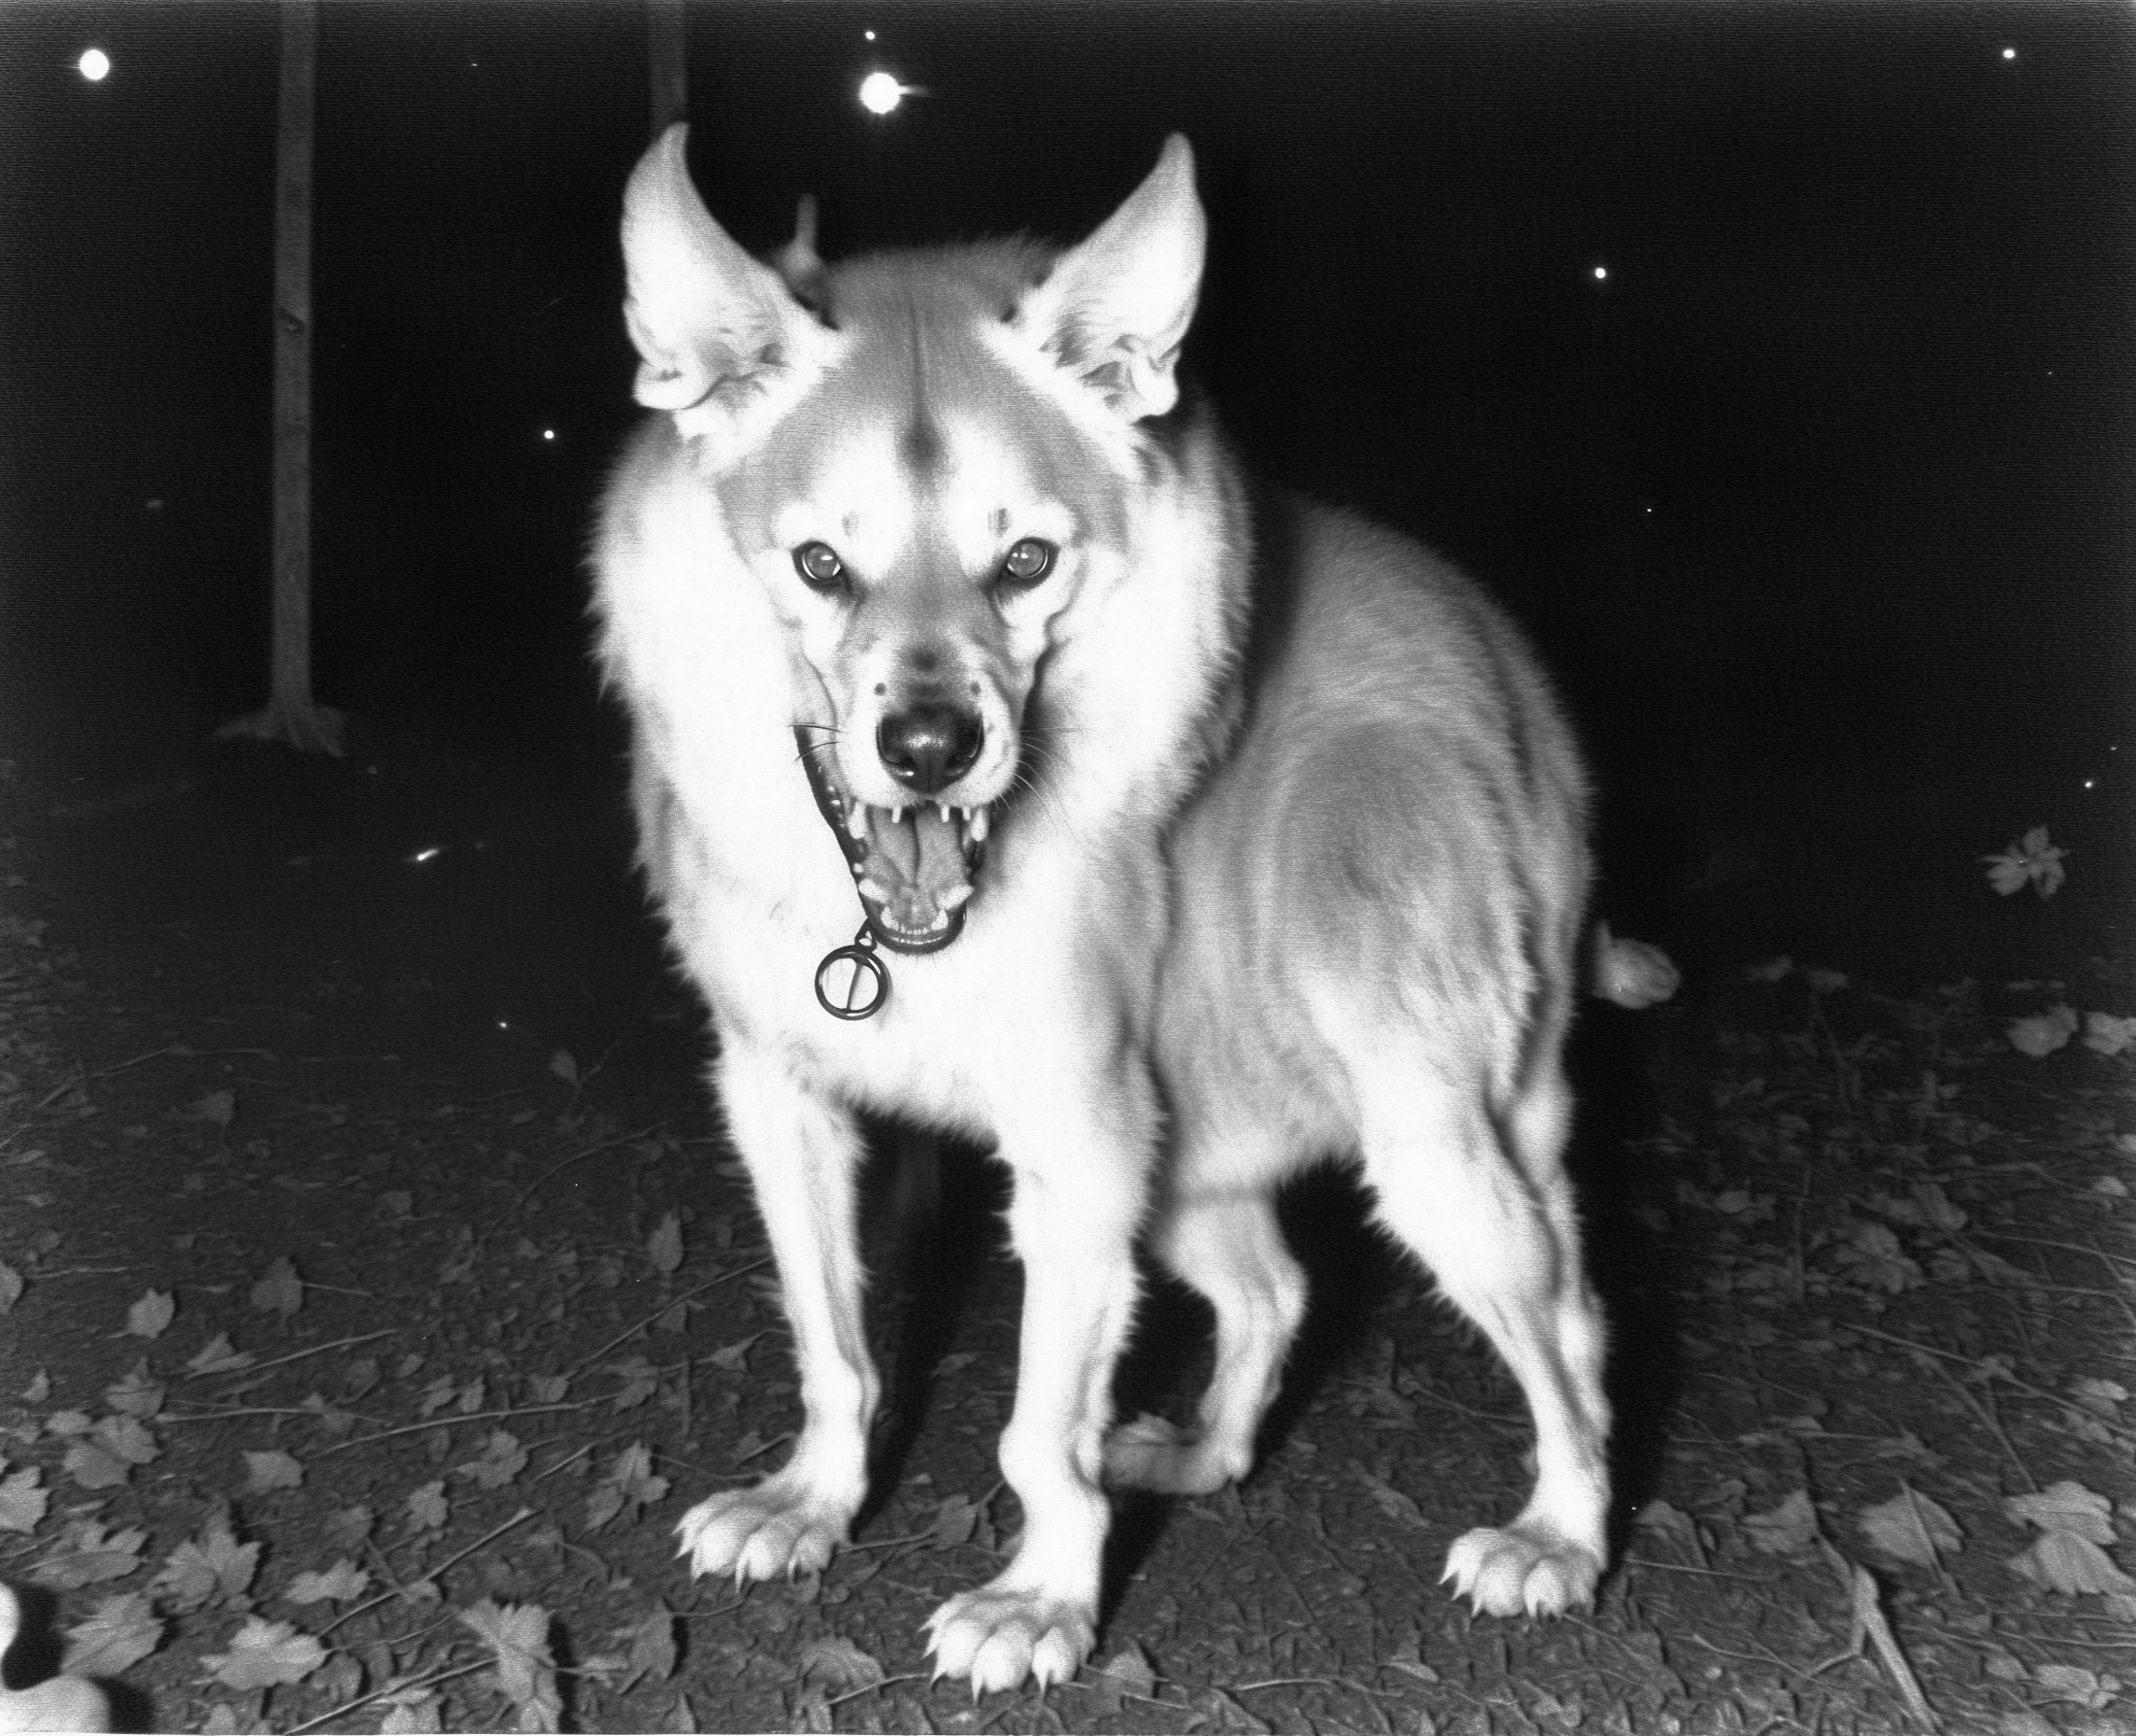 01270-602958530-(night, dimmed, dark_1.4), scary, horror, flashlight, a close up of a dog in the dark with a camera, concept art by Hieronymous.jpg